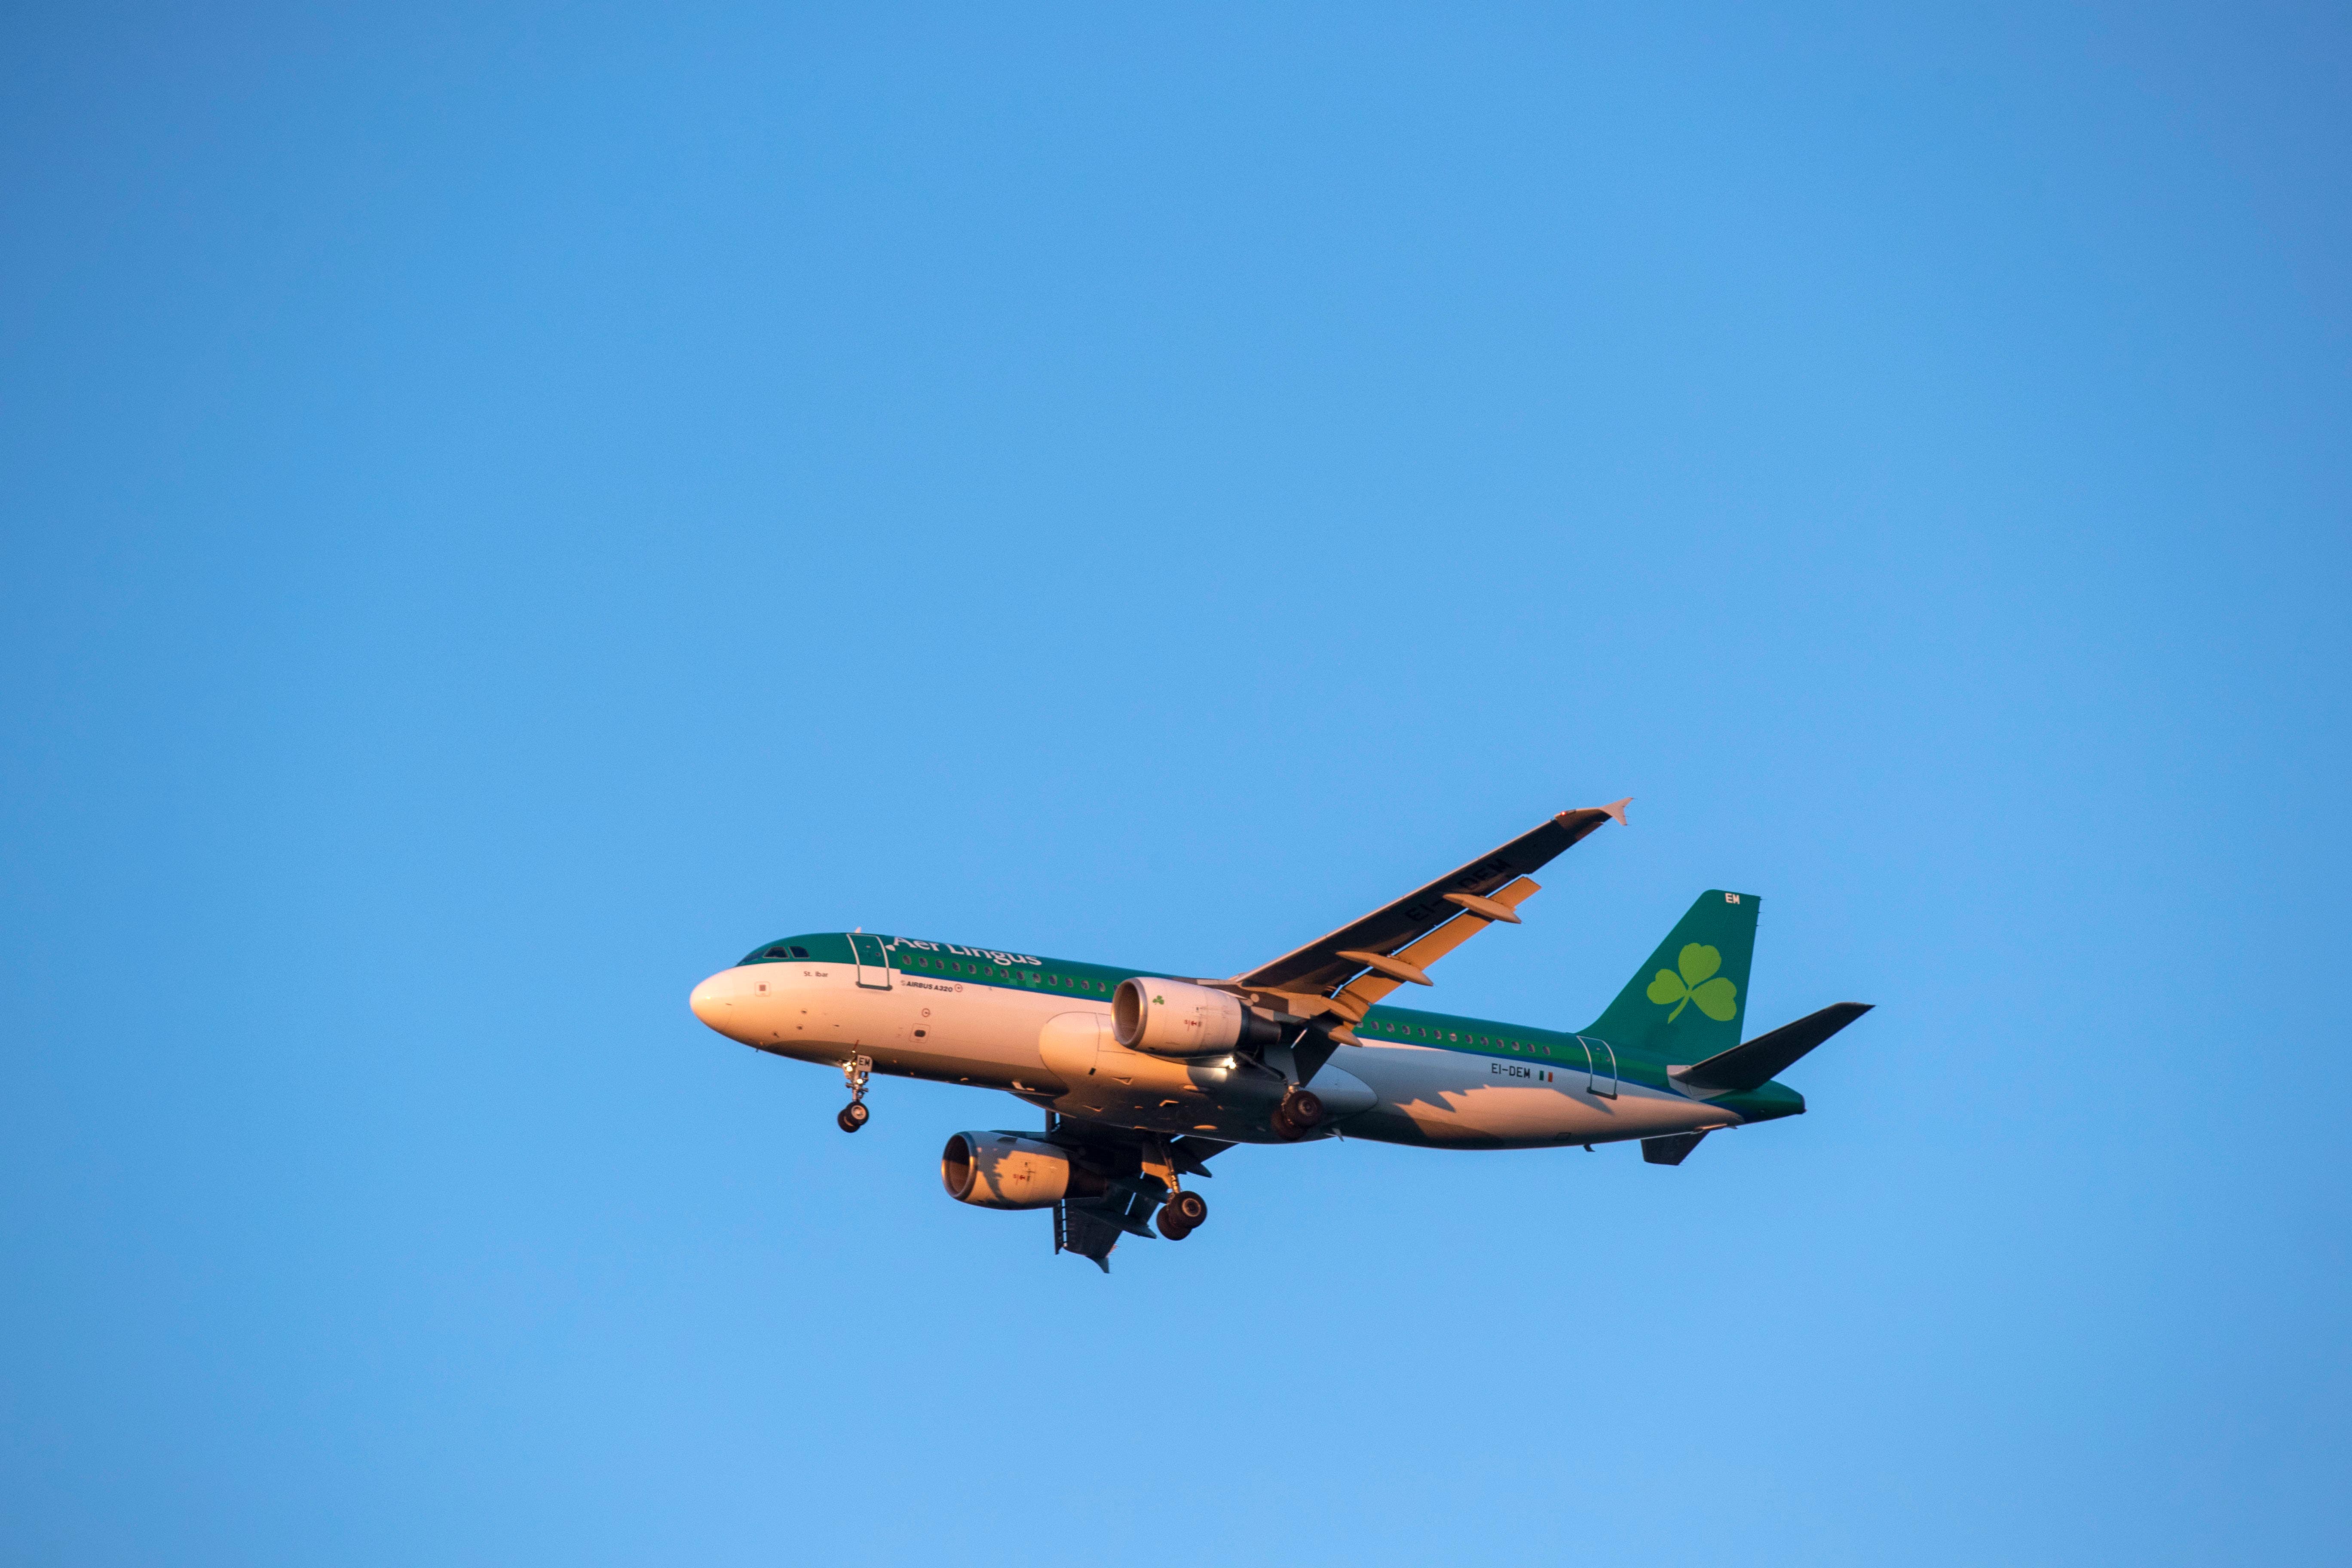 A Aer Lingus Airbus A320-214 plane lands at Heathrow Airport in West London (Steve Parsons/PA)